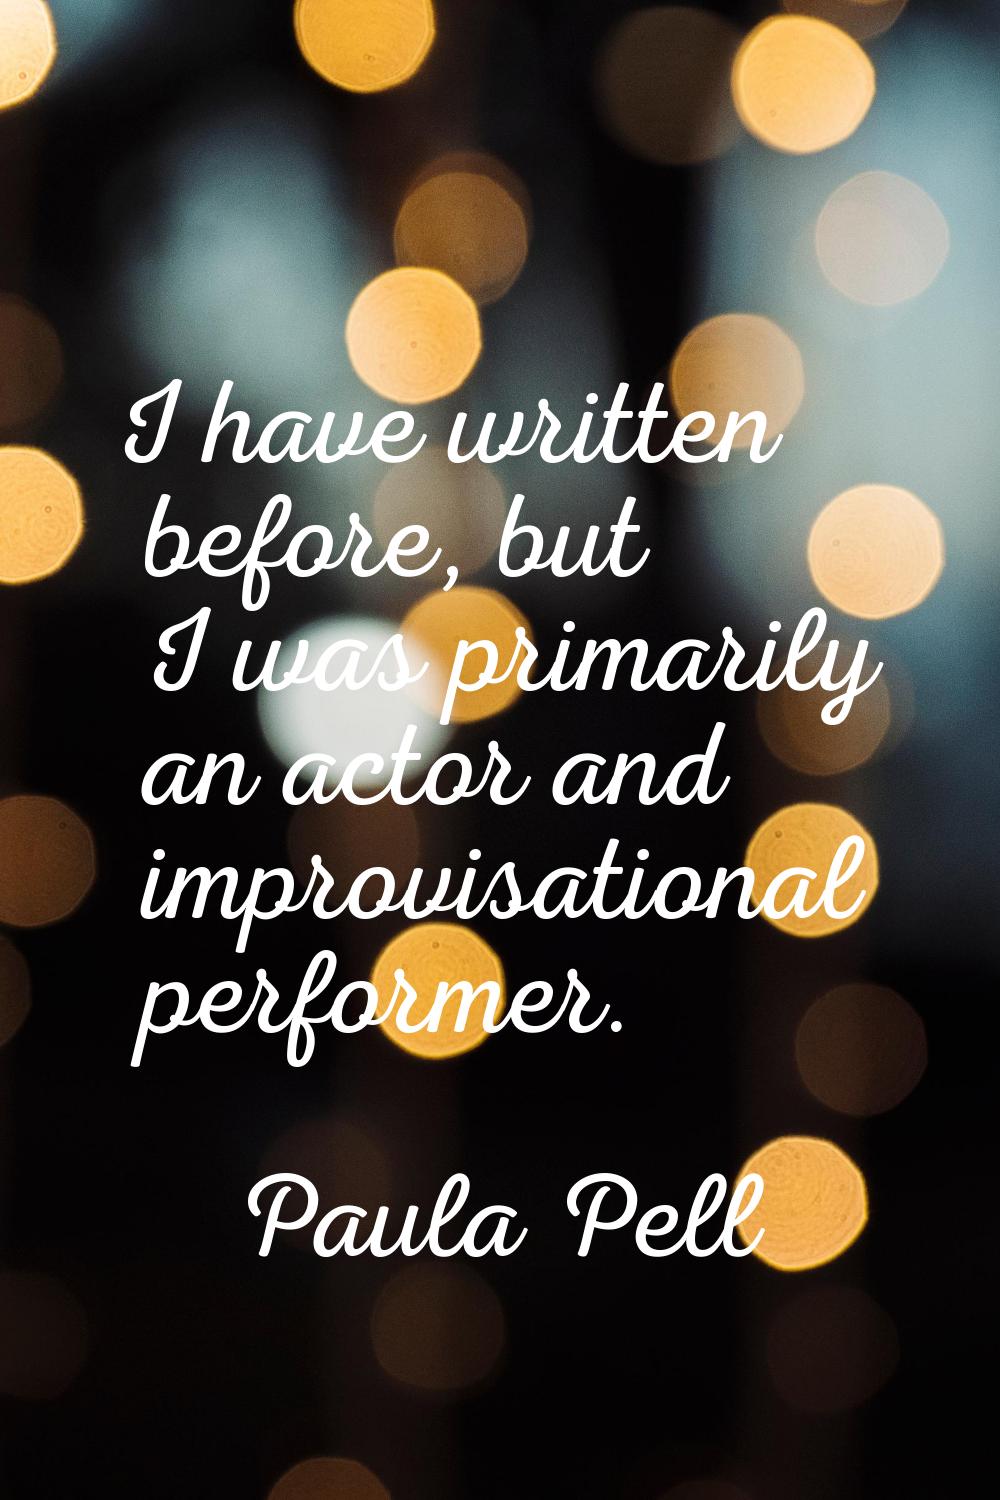 I have written before, but I was primarily an actor and improvisational performer.